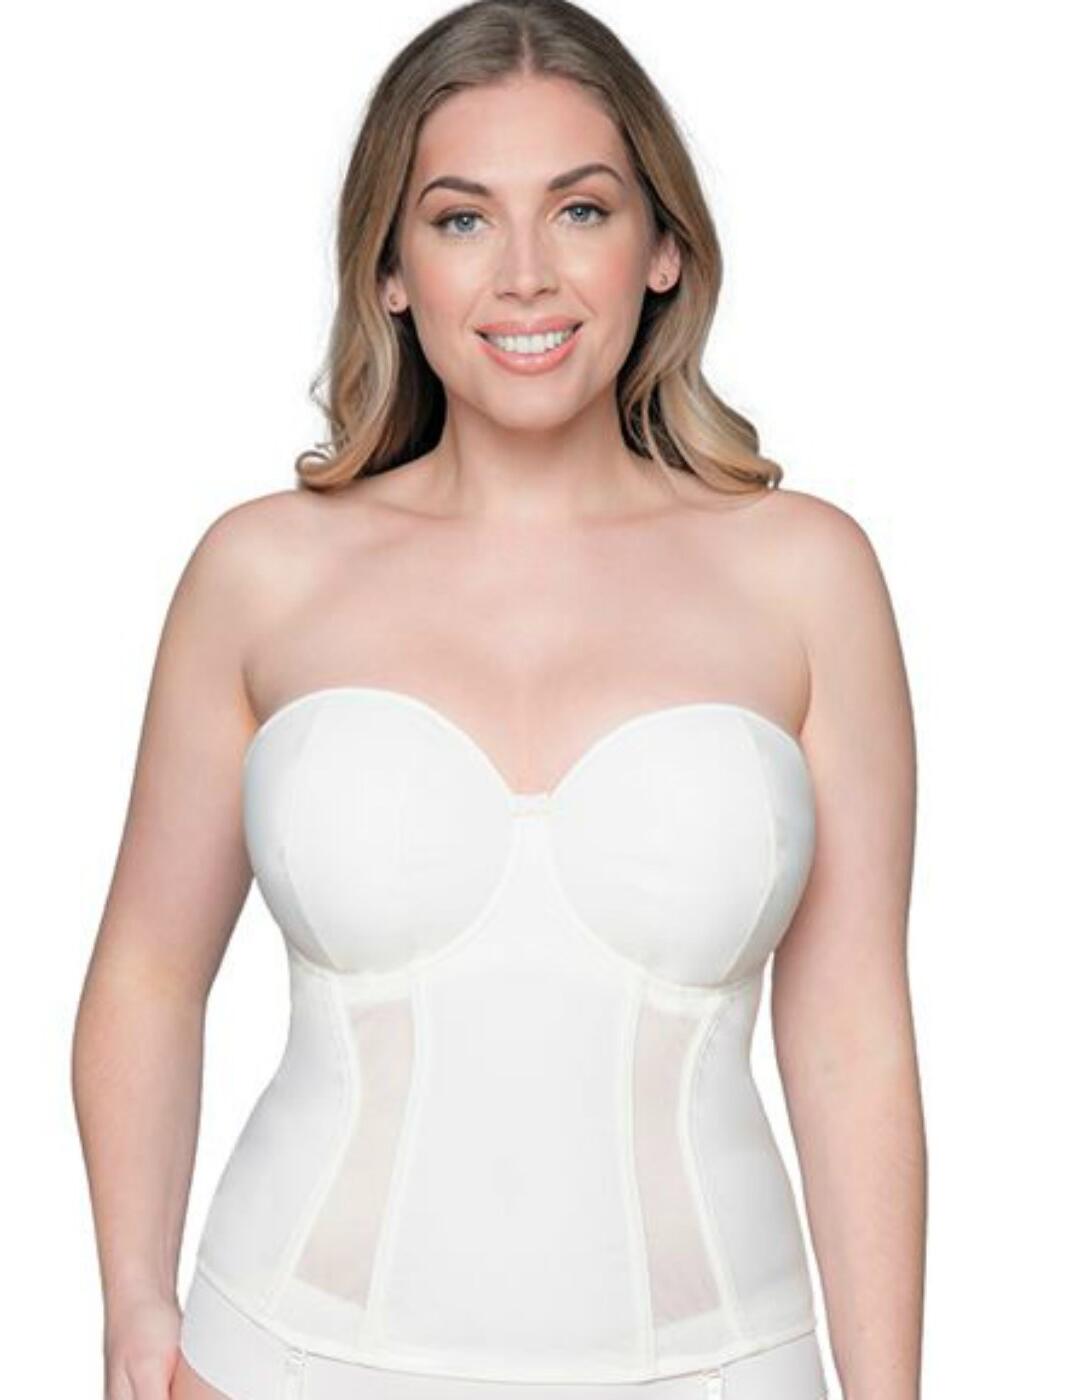 CK017707 Curvy Kate Luxe Strapless Basque - CK017707 Ivory